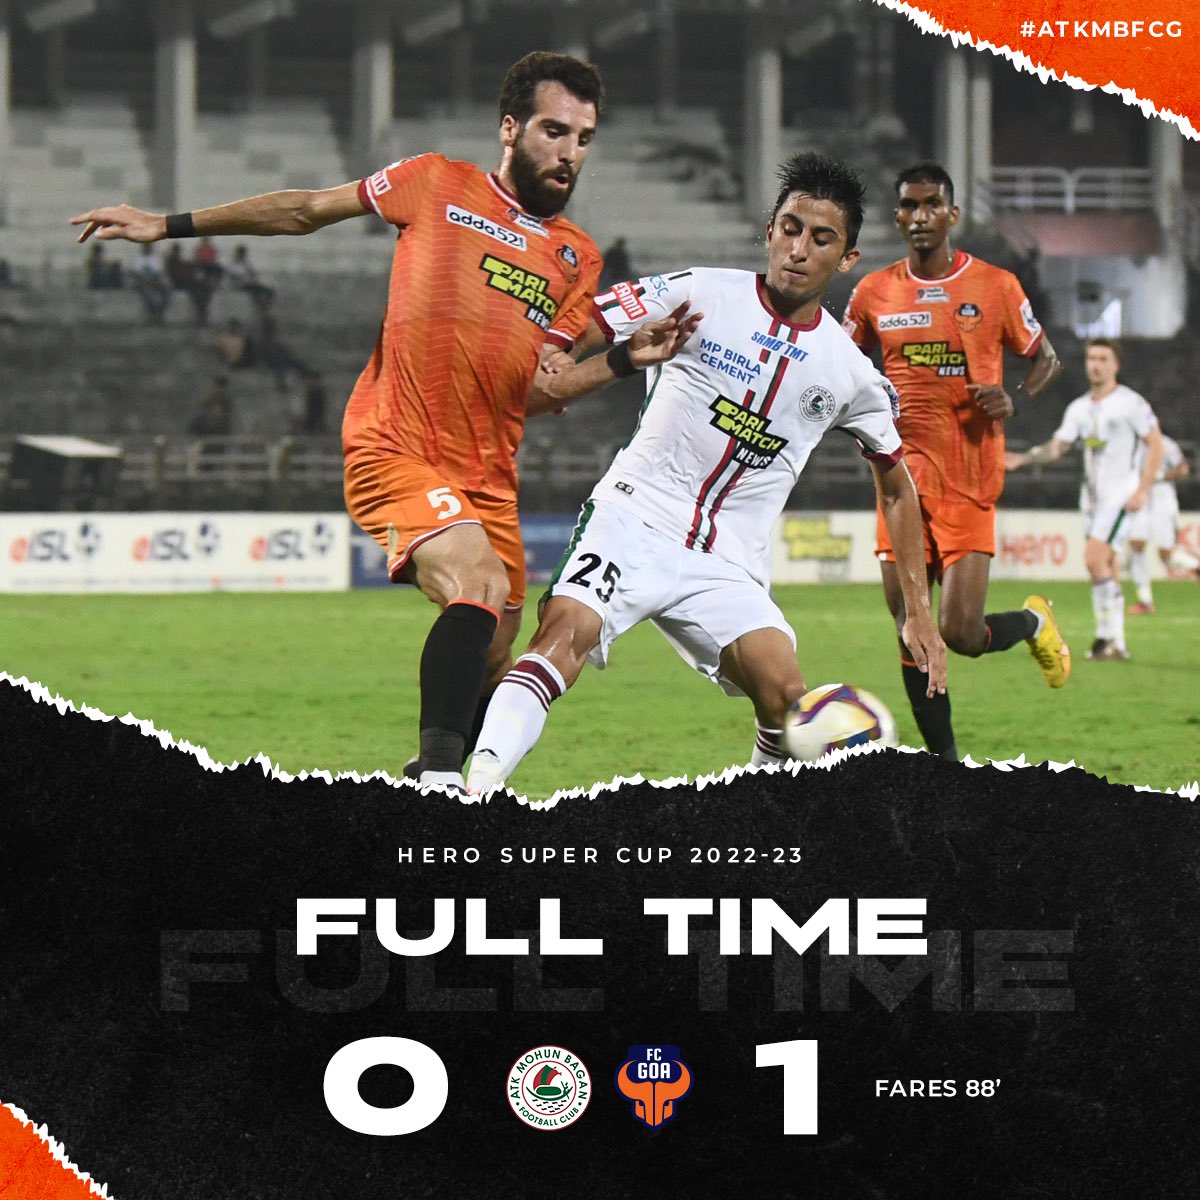 A late winner from Fares ensures we end our season with a win! 😍🧡

#ForcaGoa #UzzoOnceAgain #HeroSuperCup #ATKMBFCG